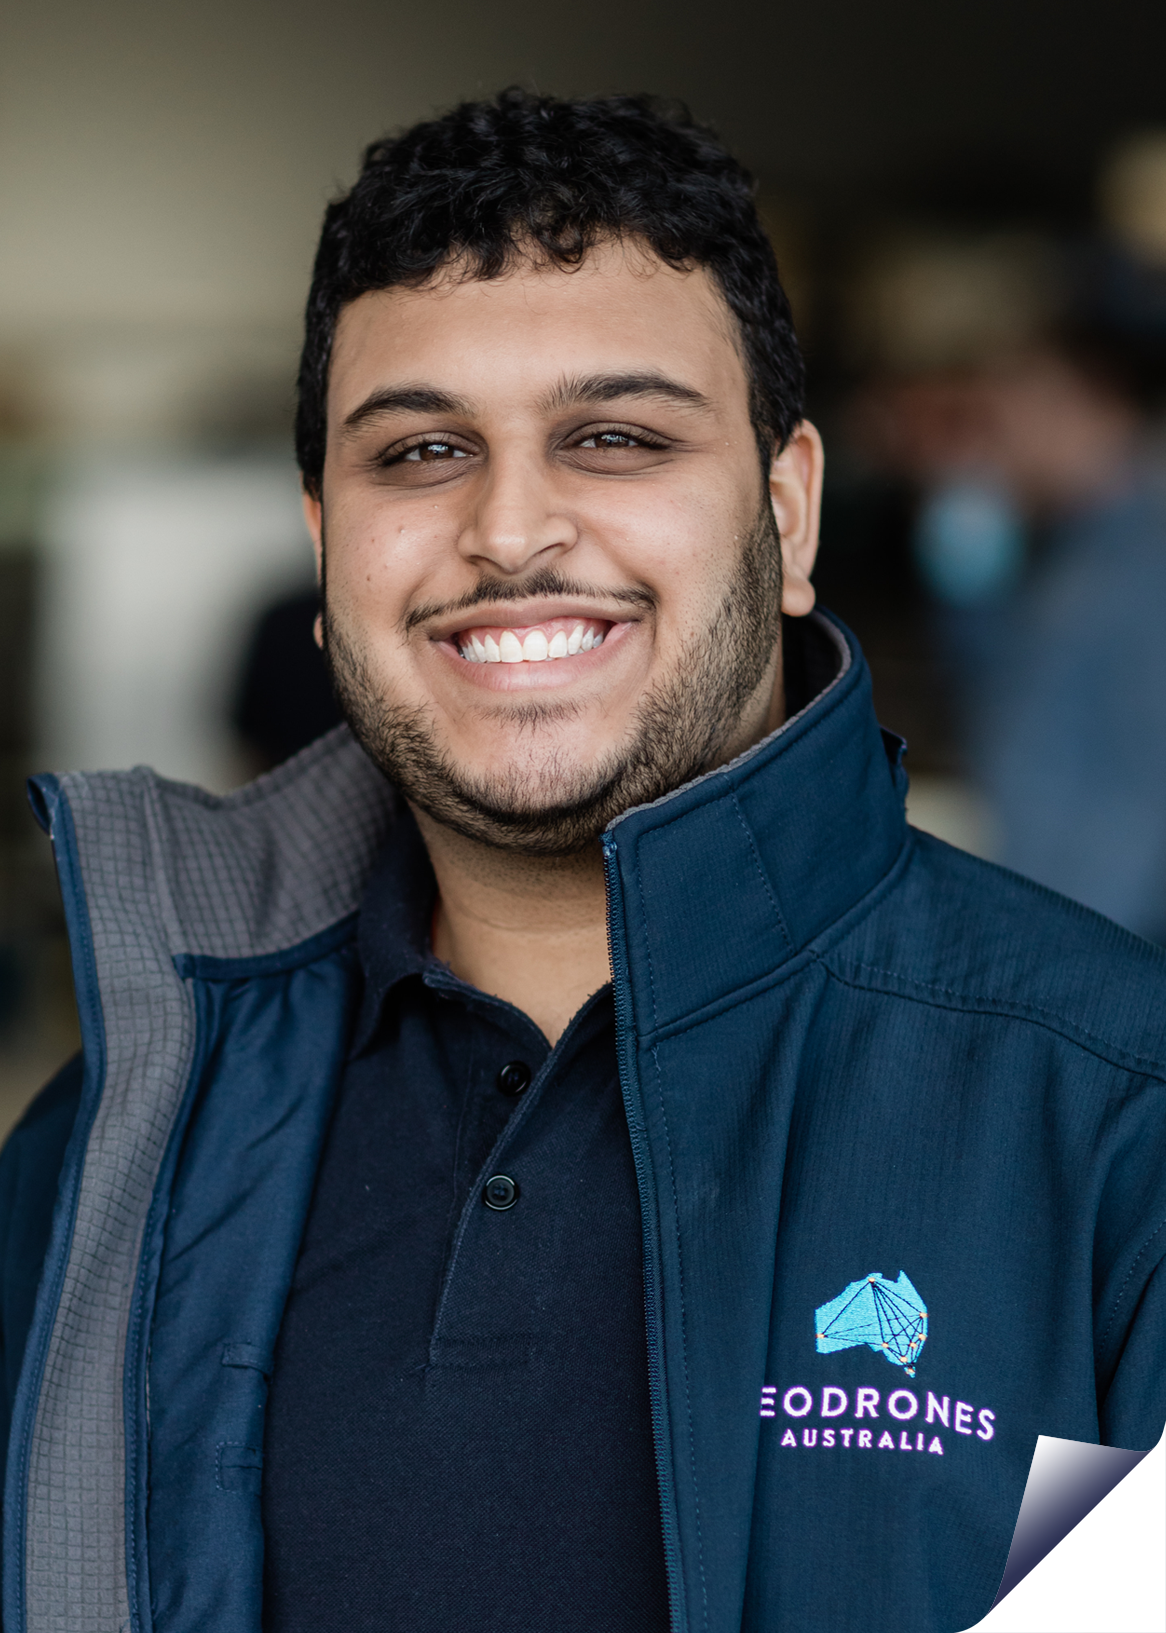 <p style="text-align: center;"><strong>Akshay Vithal</strong></p>
<p>AEROSPACE ENGINEER</p>
<p style="text-align: center;">A recent Aerospace Engineering graduate from The University of Sydney, Akshay’s role is to analyse Geodrones’ Aerial Vehicle design, performance, aerodynamics and stability.</p>